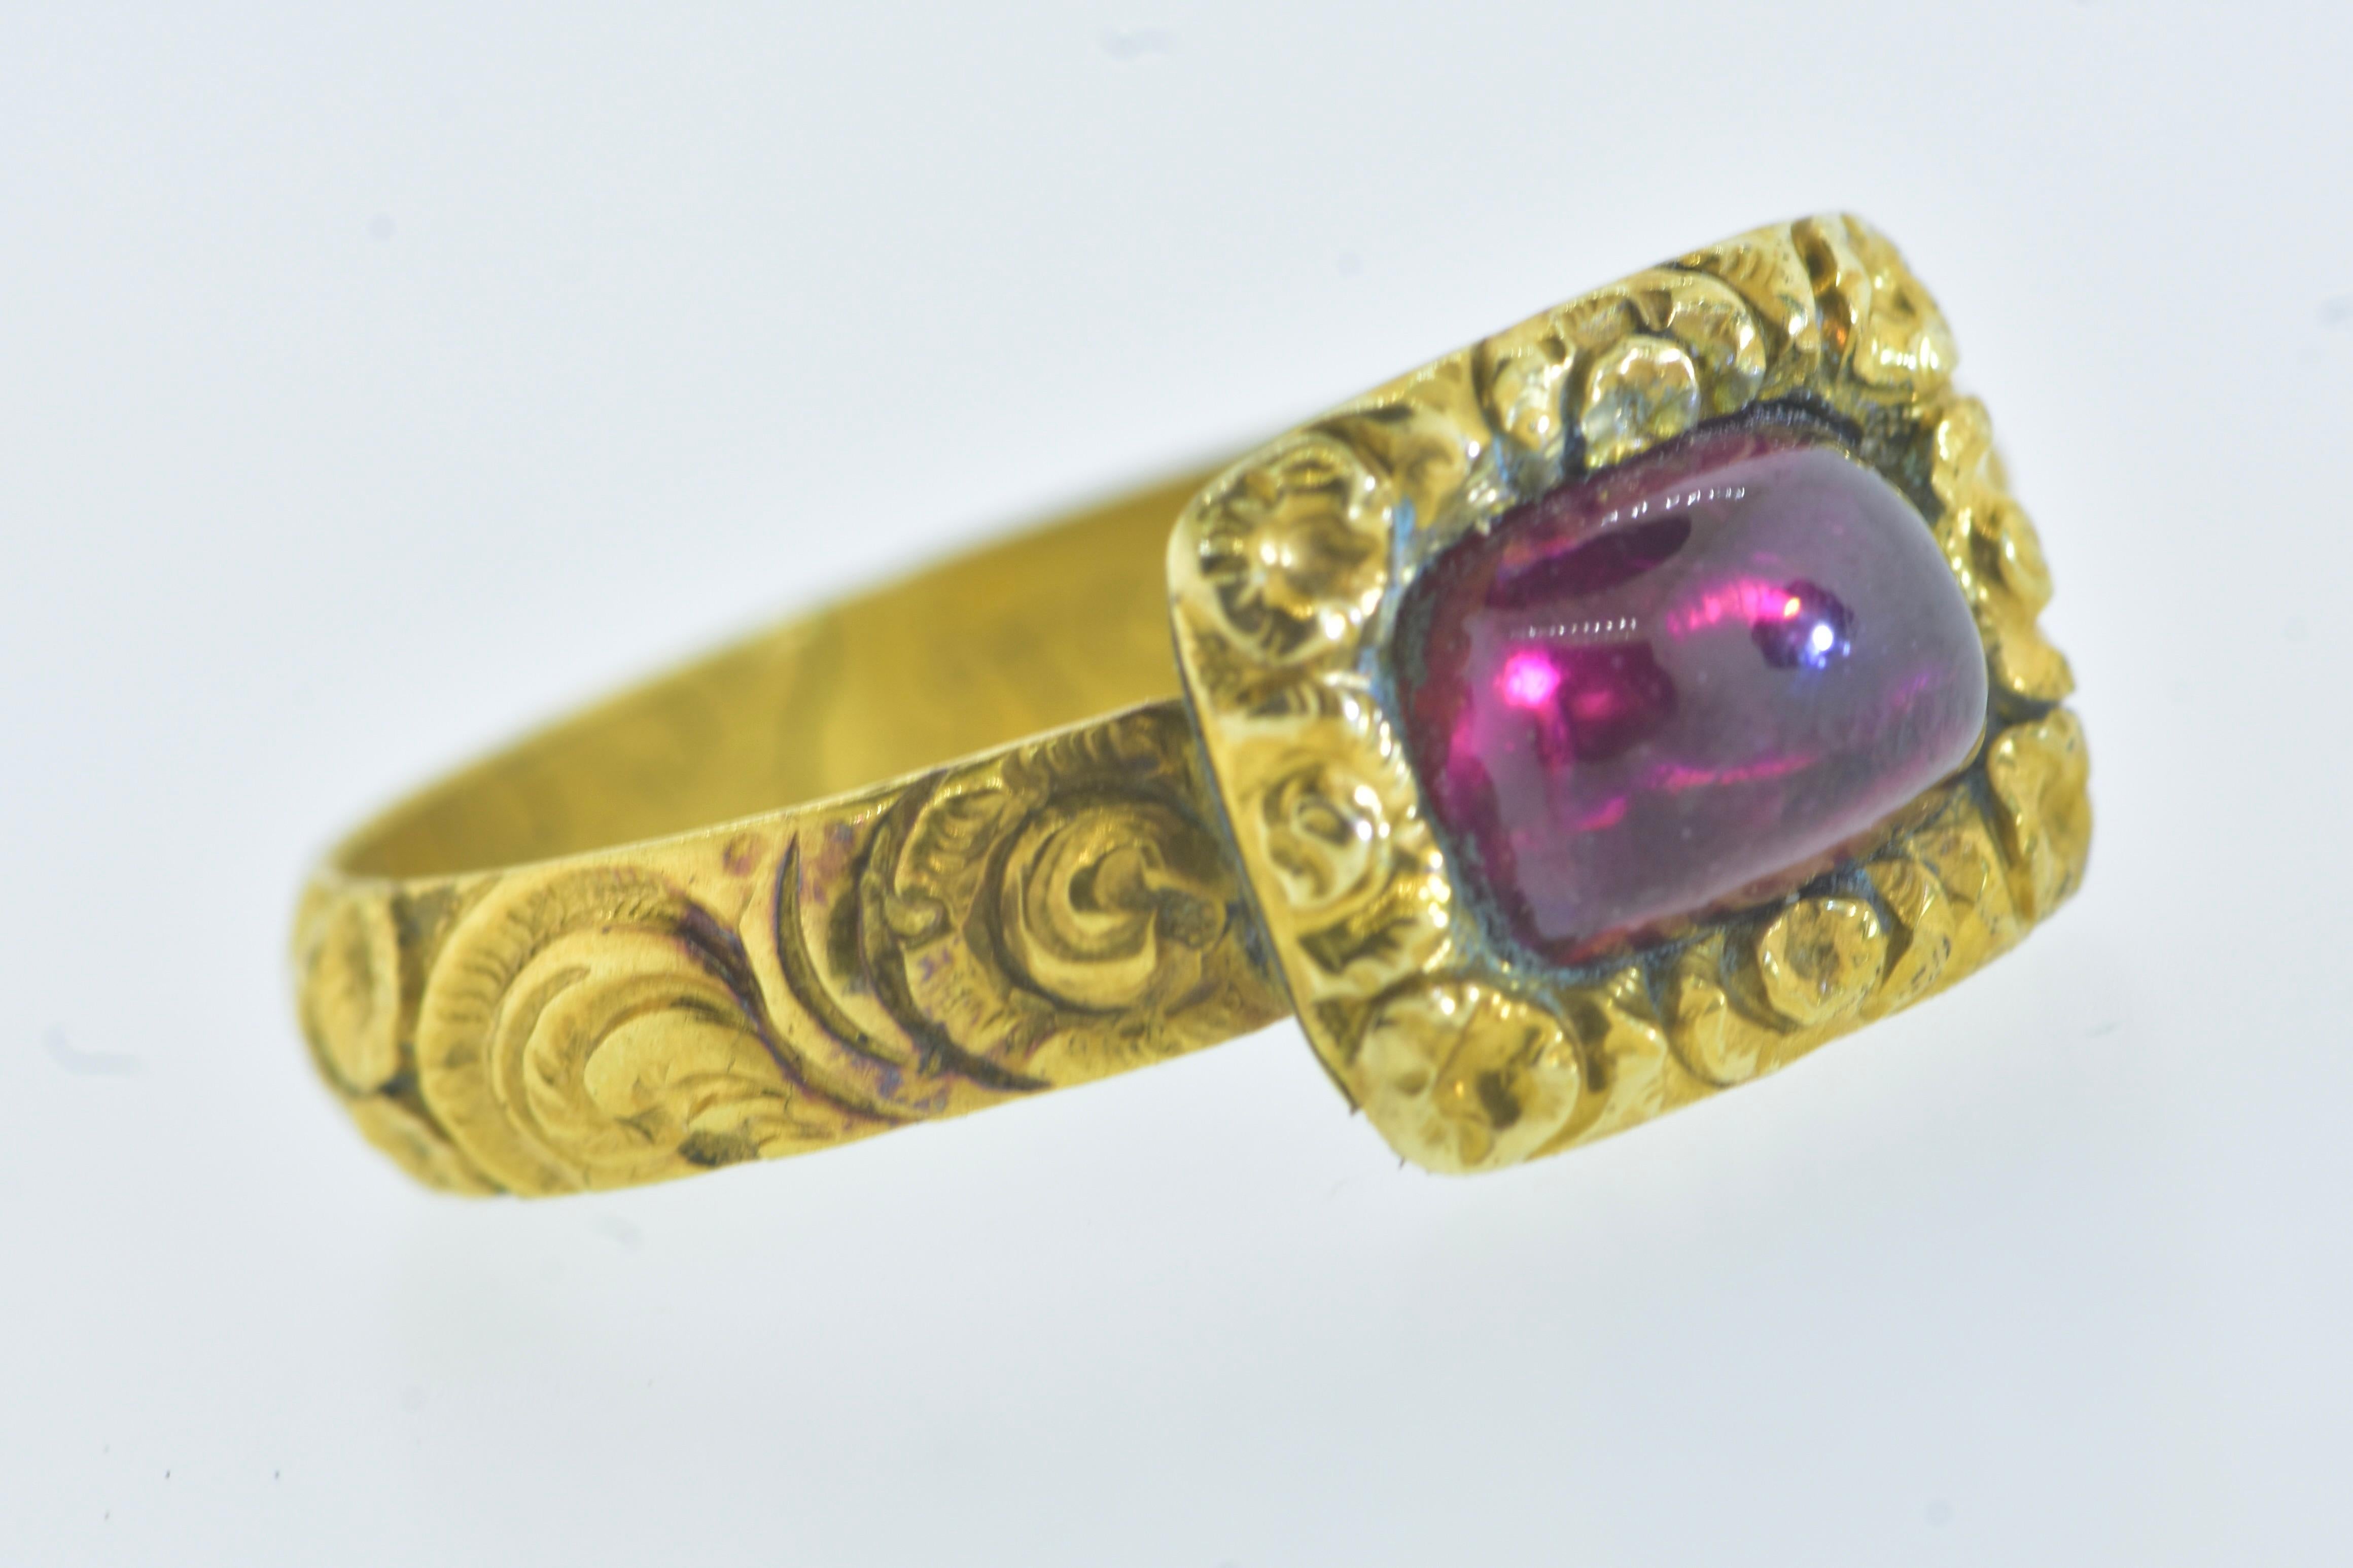 George II Antique 18K and Garnet Ring,  Inscribed and dated 1712-1765.